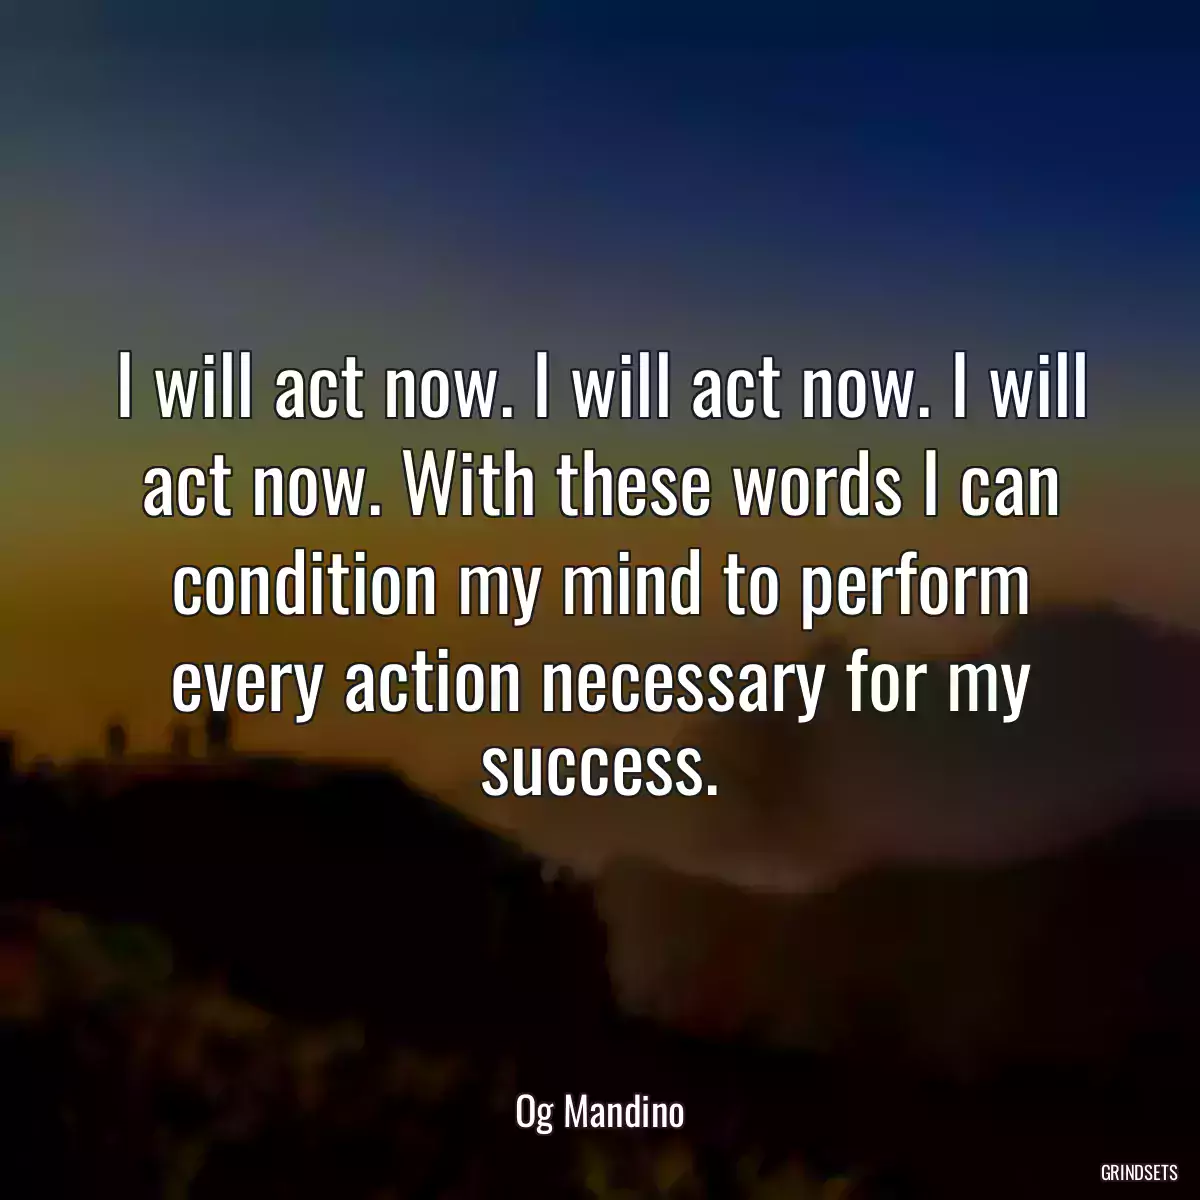 I will act now. I will act now. I will act now. With these words I can condition my mind to perform every action necessary for my success.